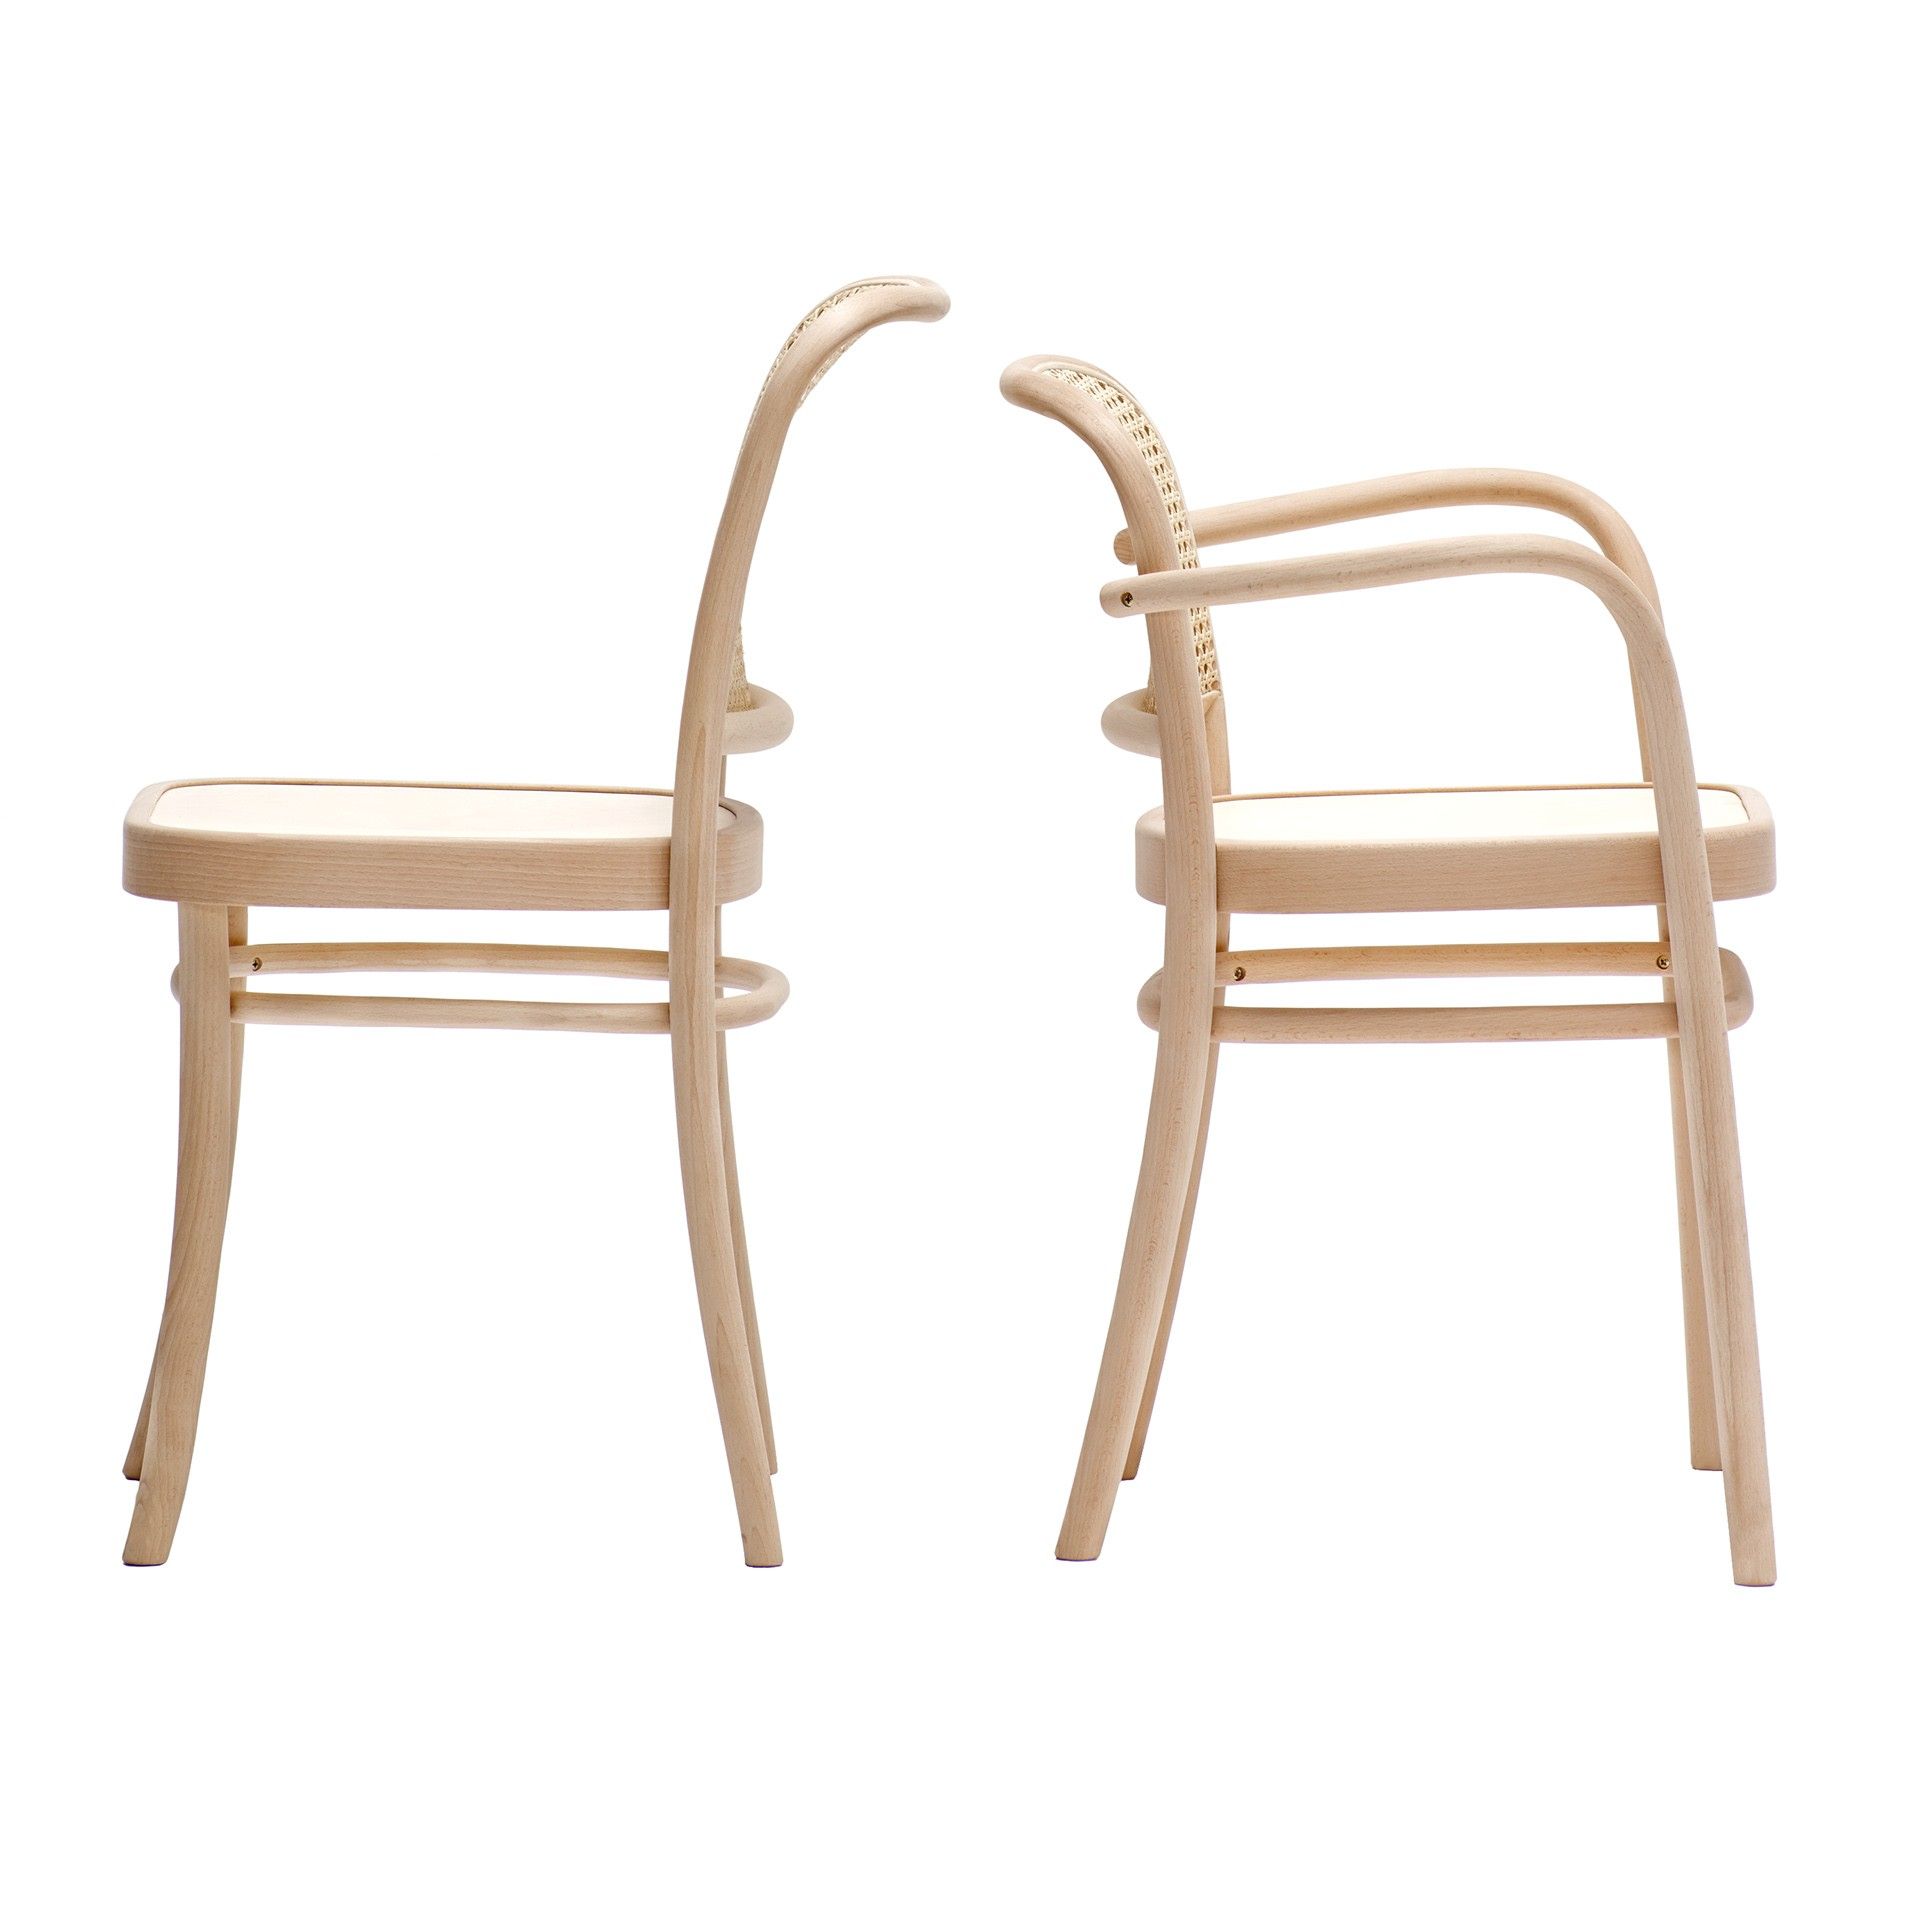 Chair B-8130 BENKO by Paged